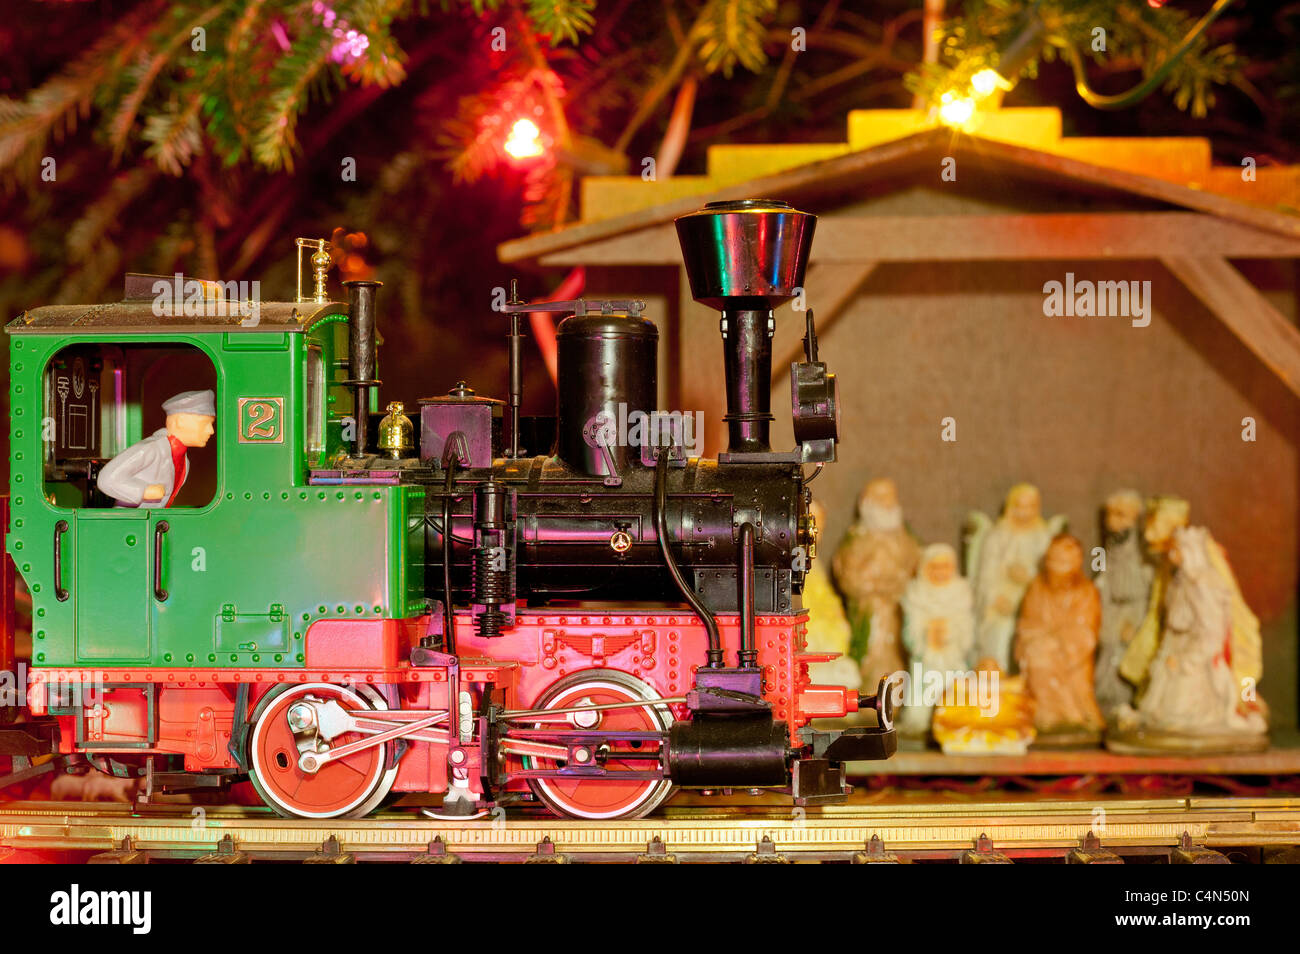 Christmas Train and Stable by Christmas Tree. Stock Photo